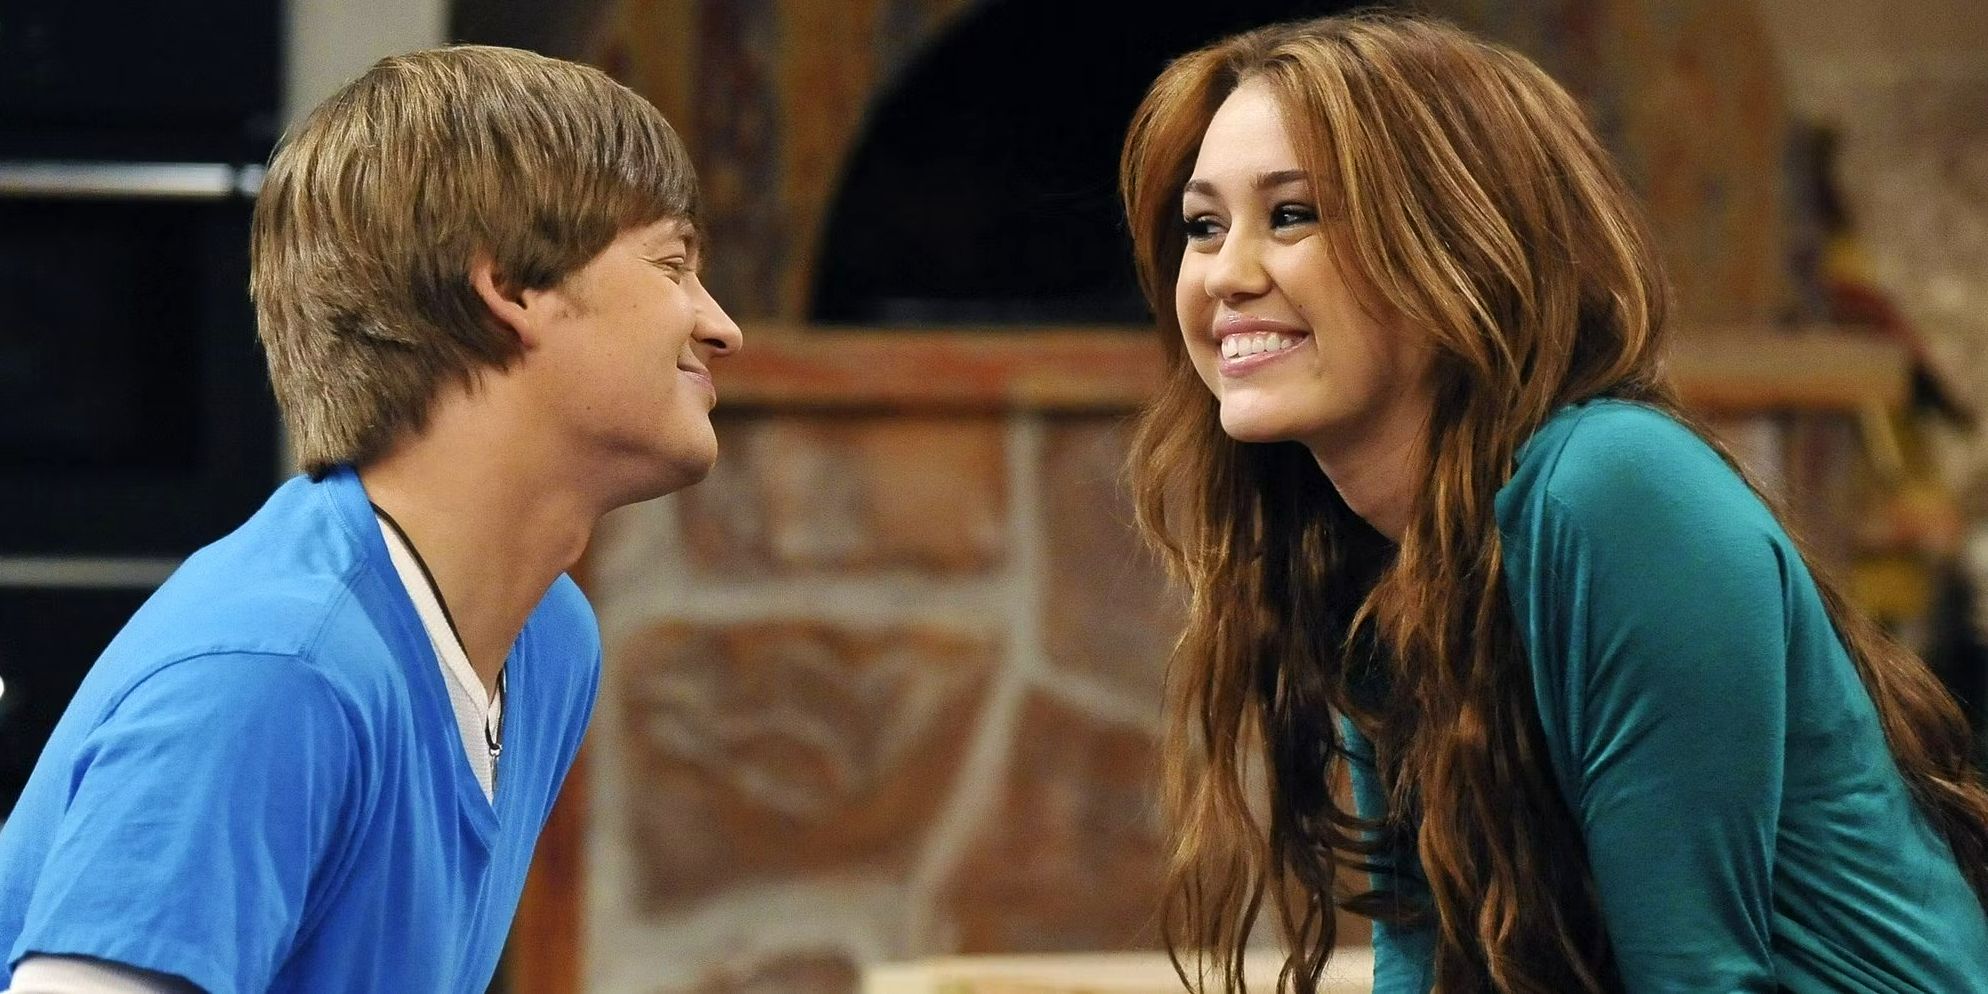 Hannah Montana Miley Cyrus as Miley Stewart and Jason Earles as Jackson smiling at each other